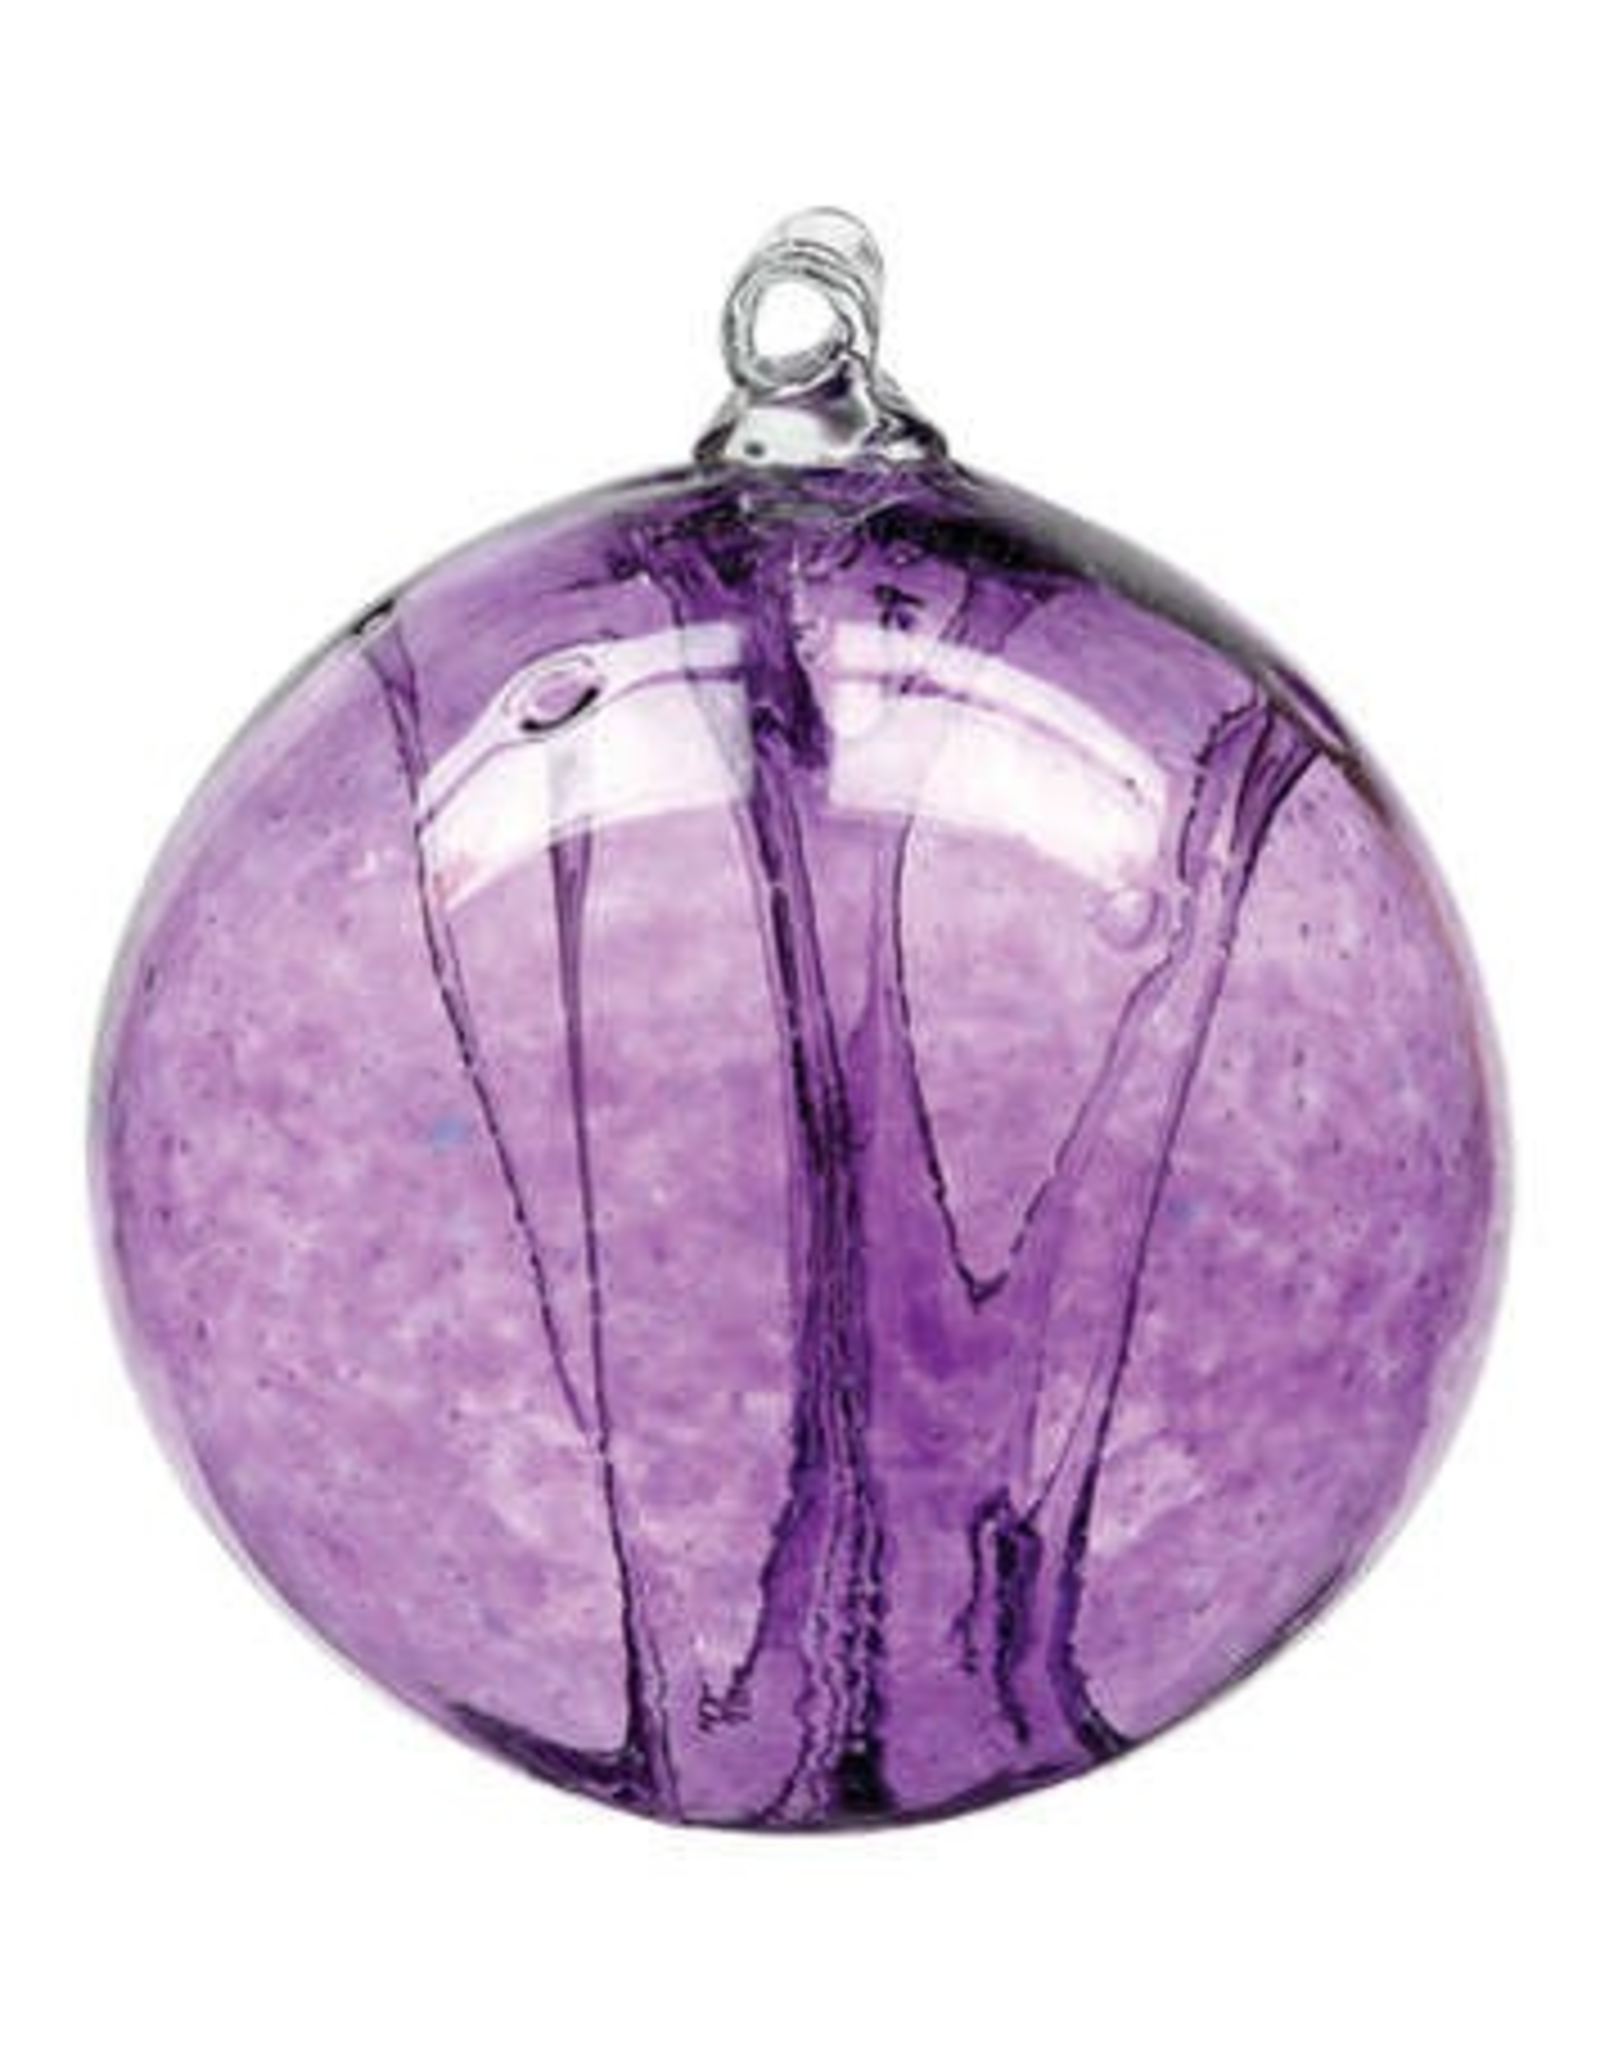 Kitras 6" Olde English Witch Ball-Amethyst